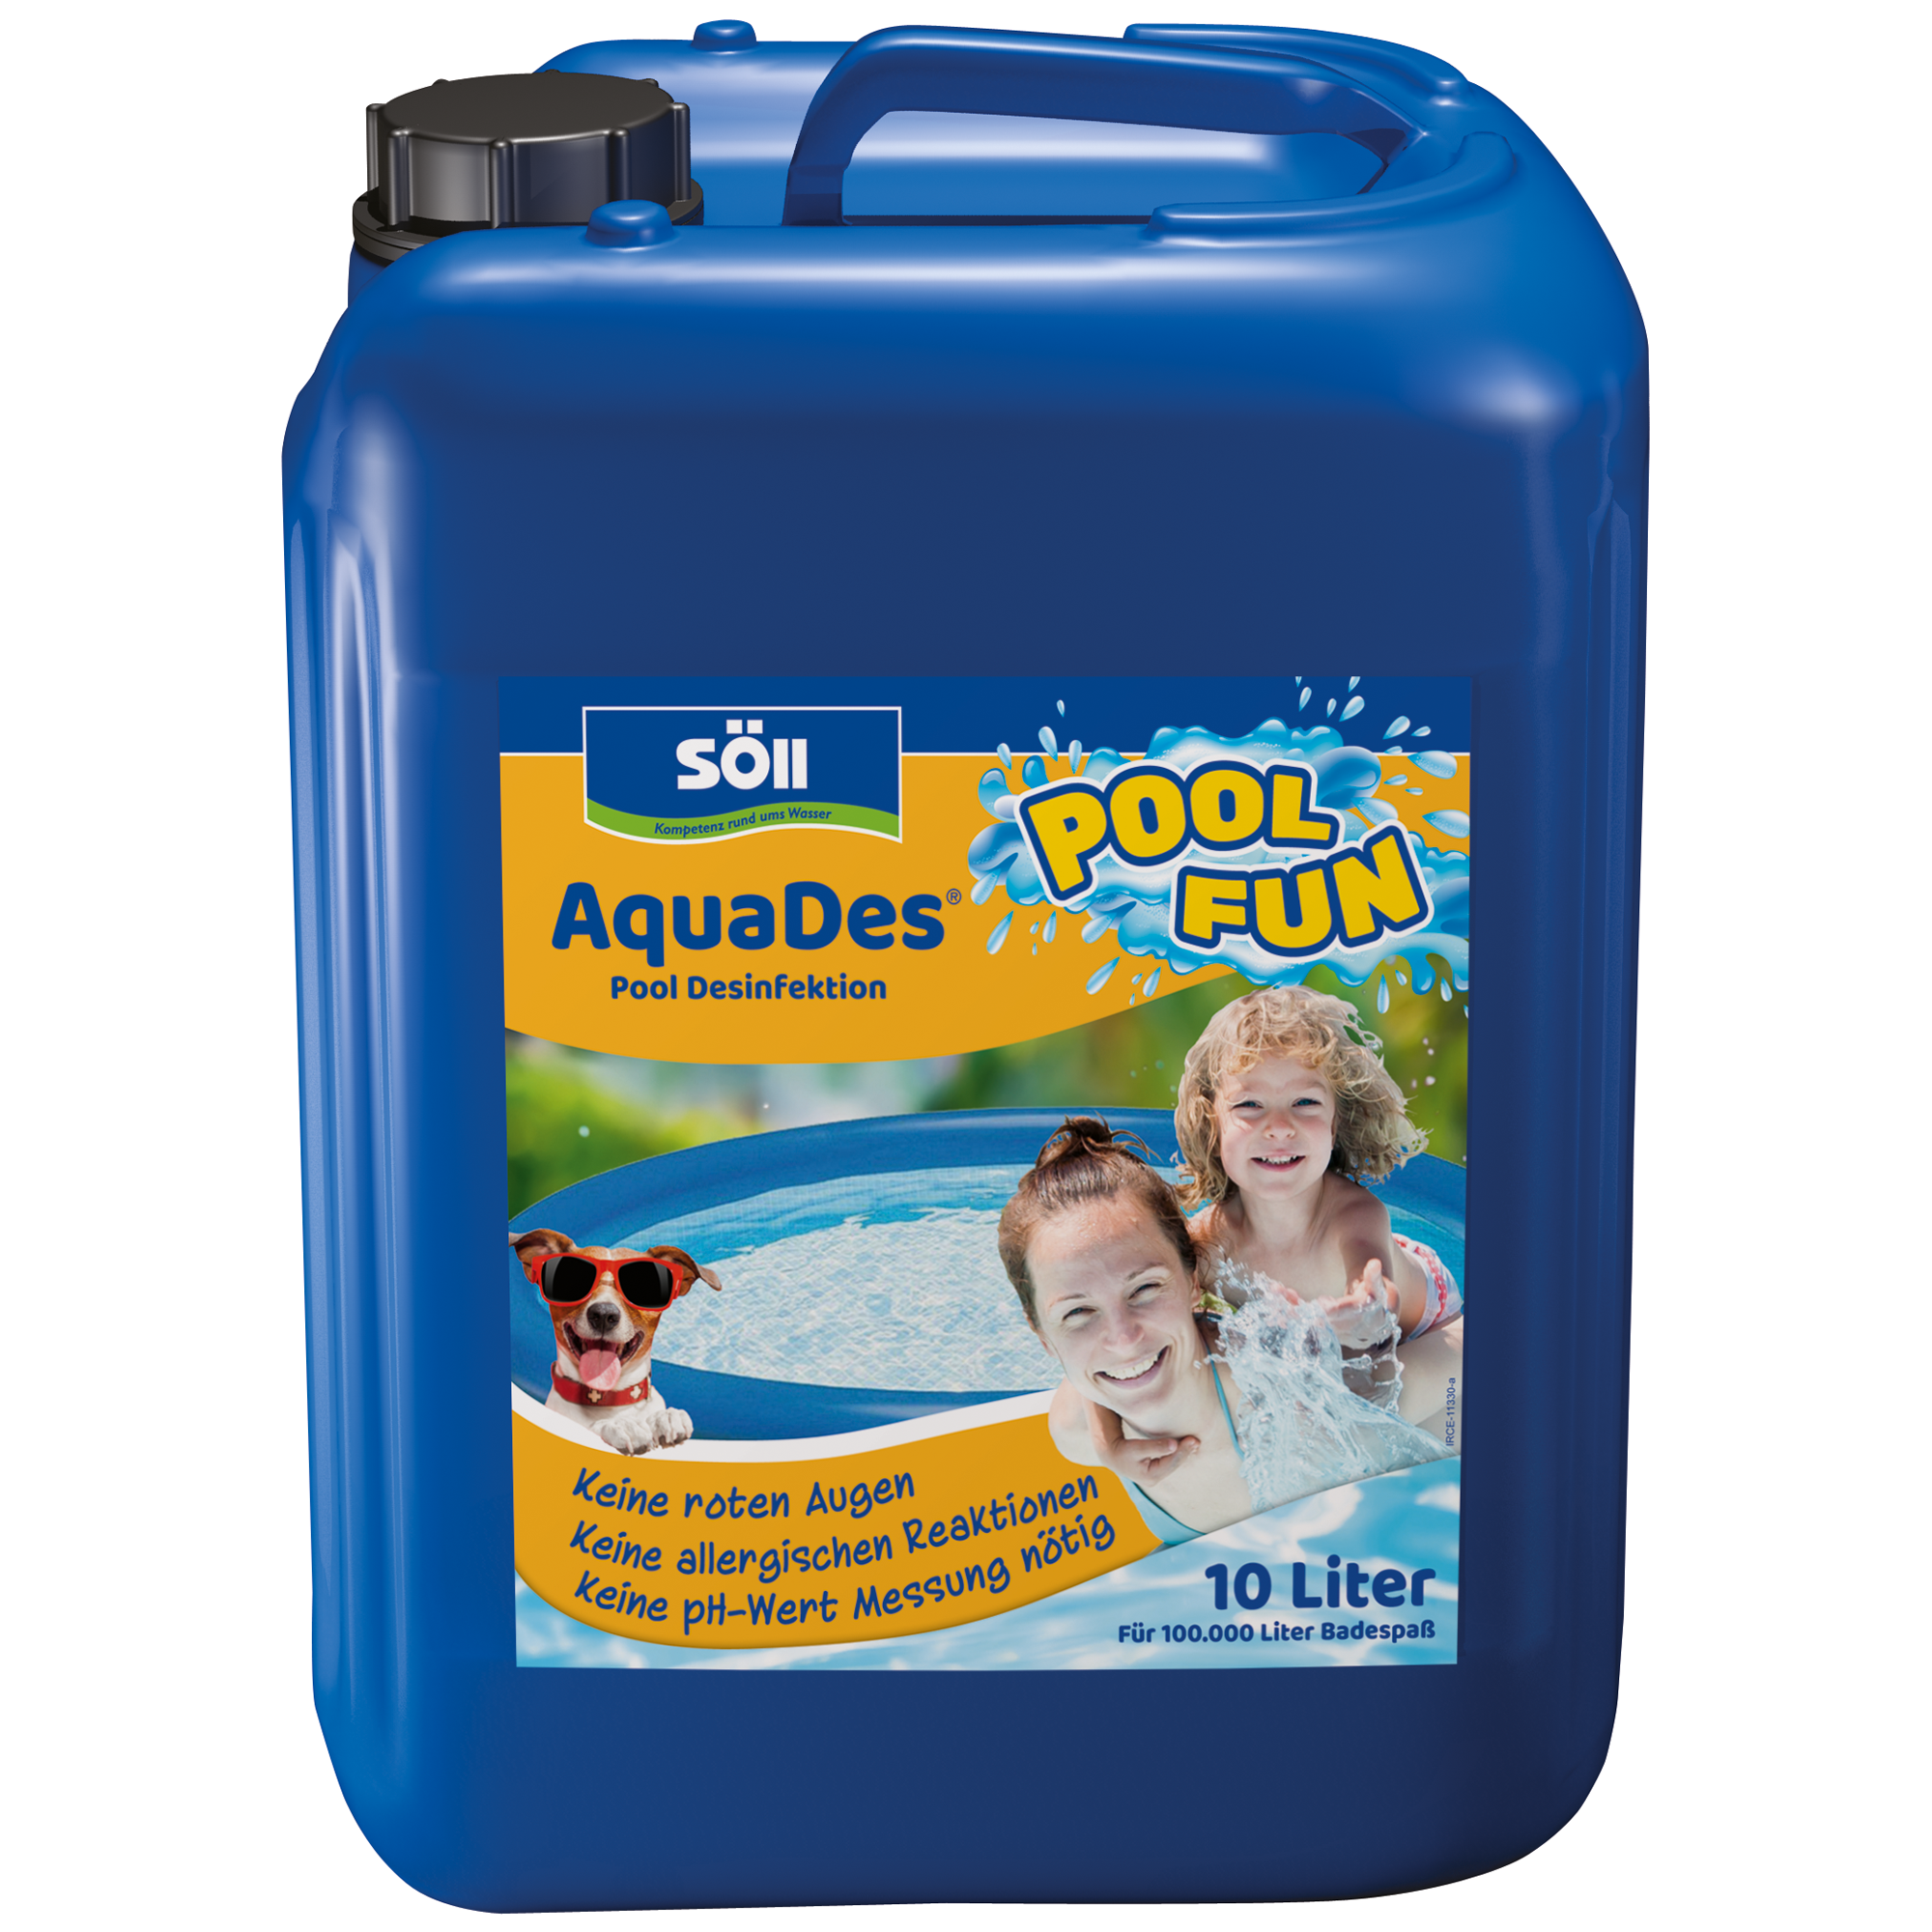 Pool-Desinfektion 'AquaDes' 10 Liter + product picture